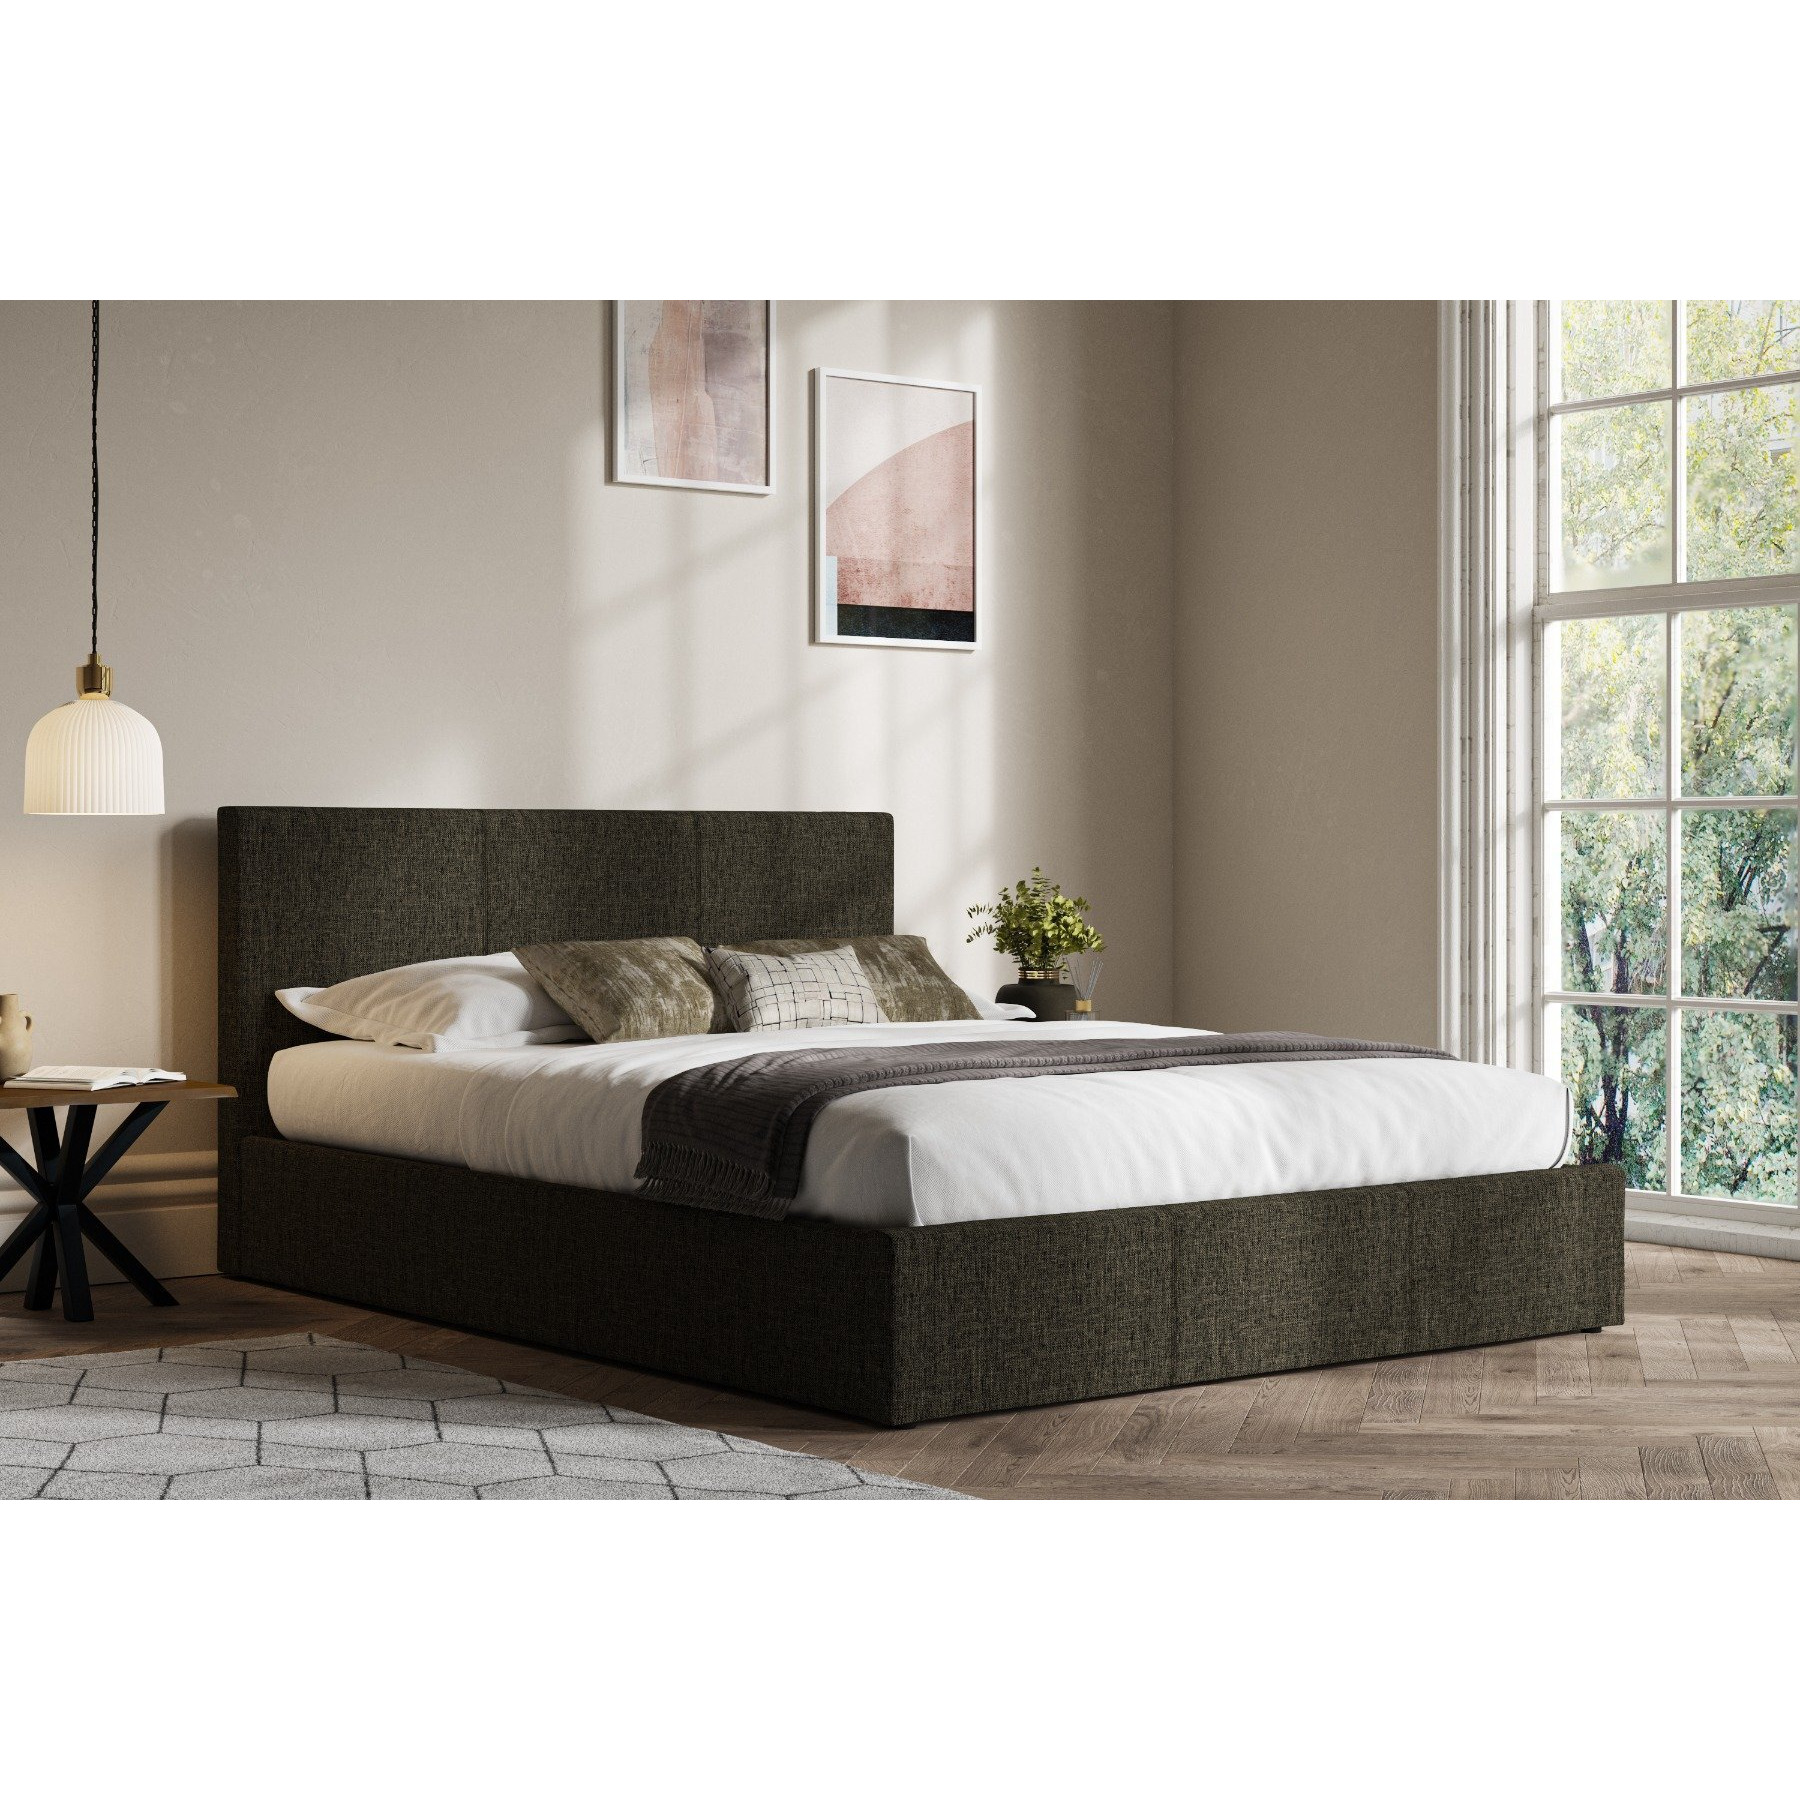 Emporia Beds Stirling Charcoal Fabric Ottoman Bed Frame Small Double - image 1